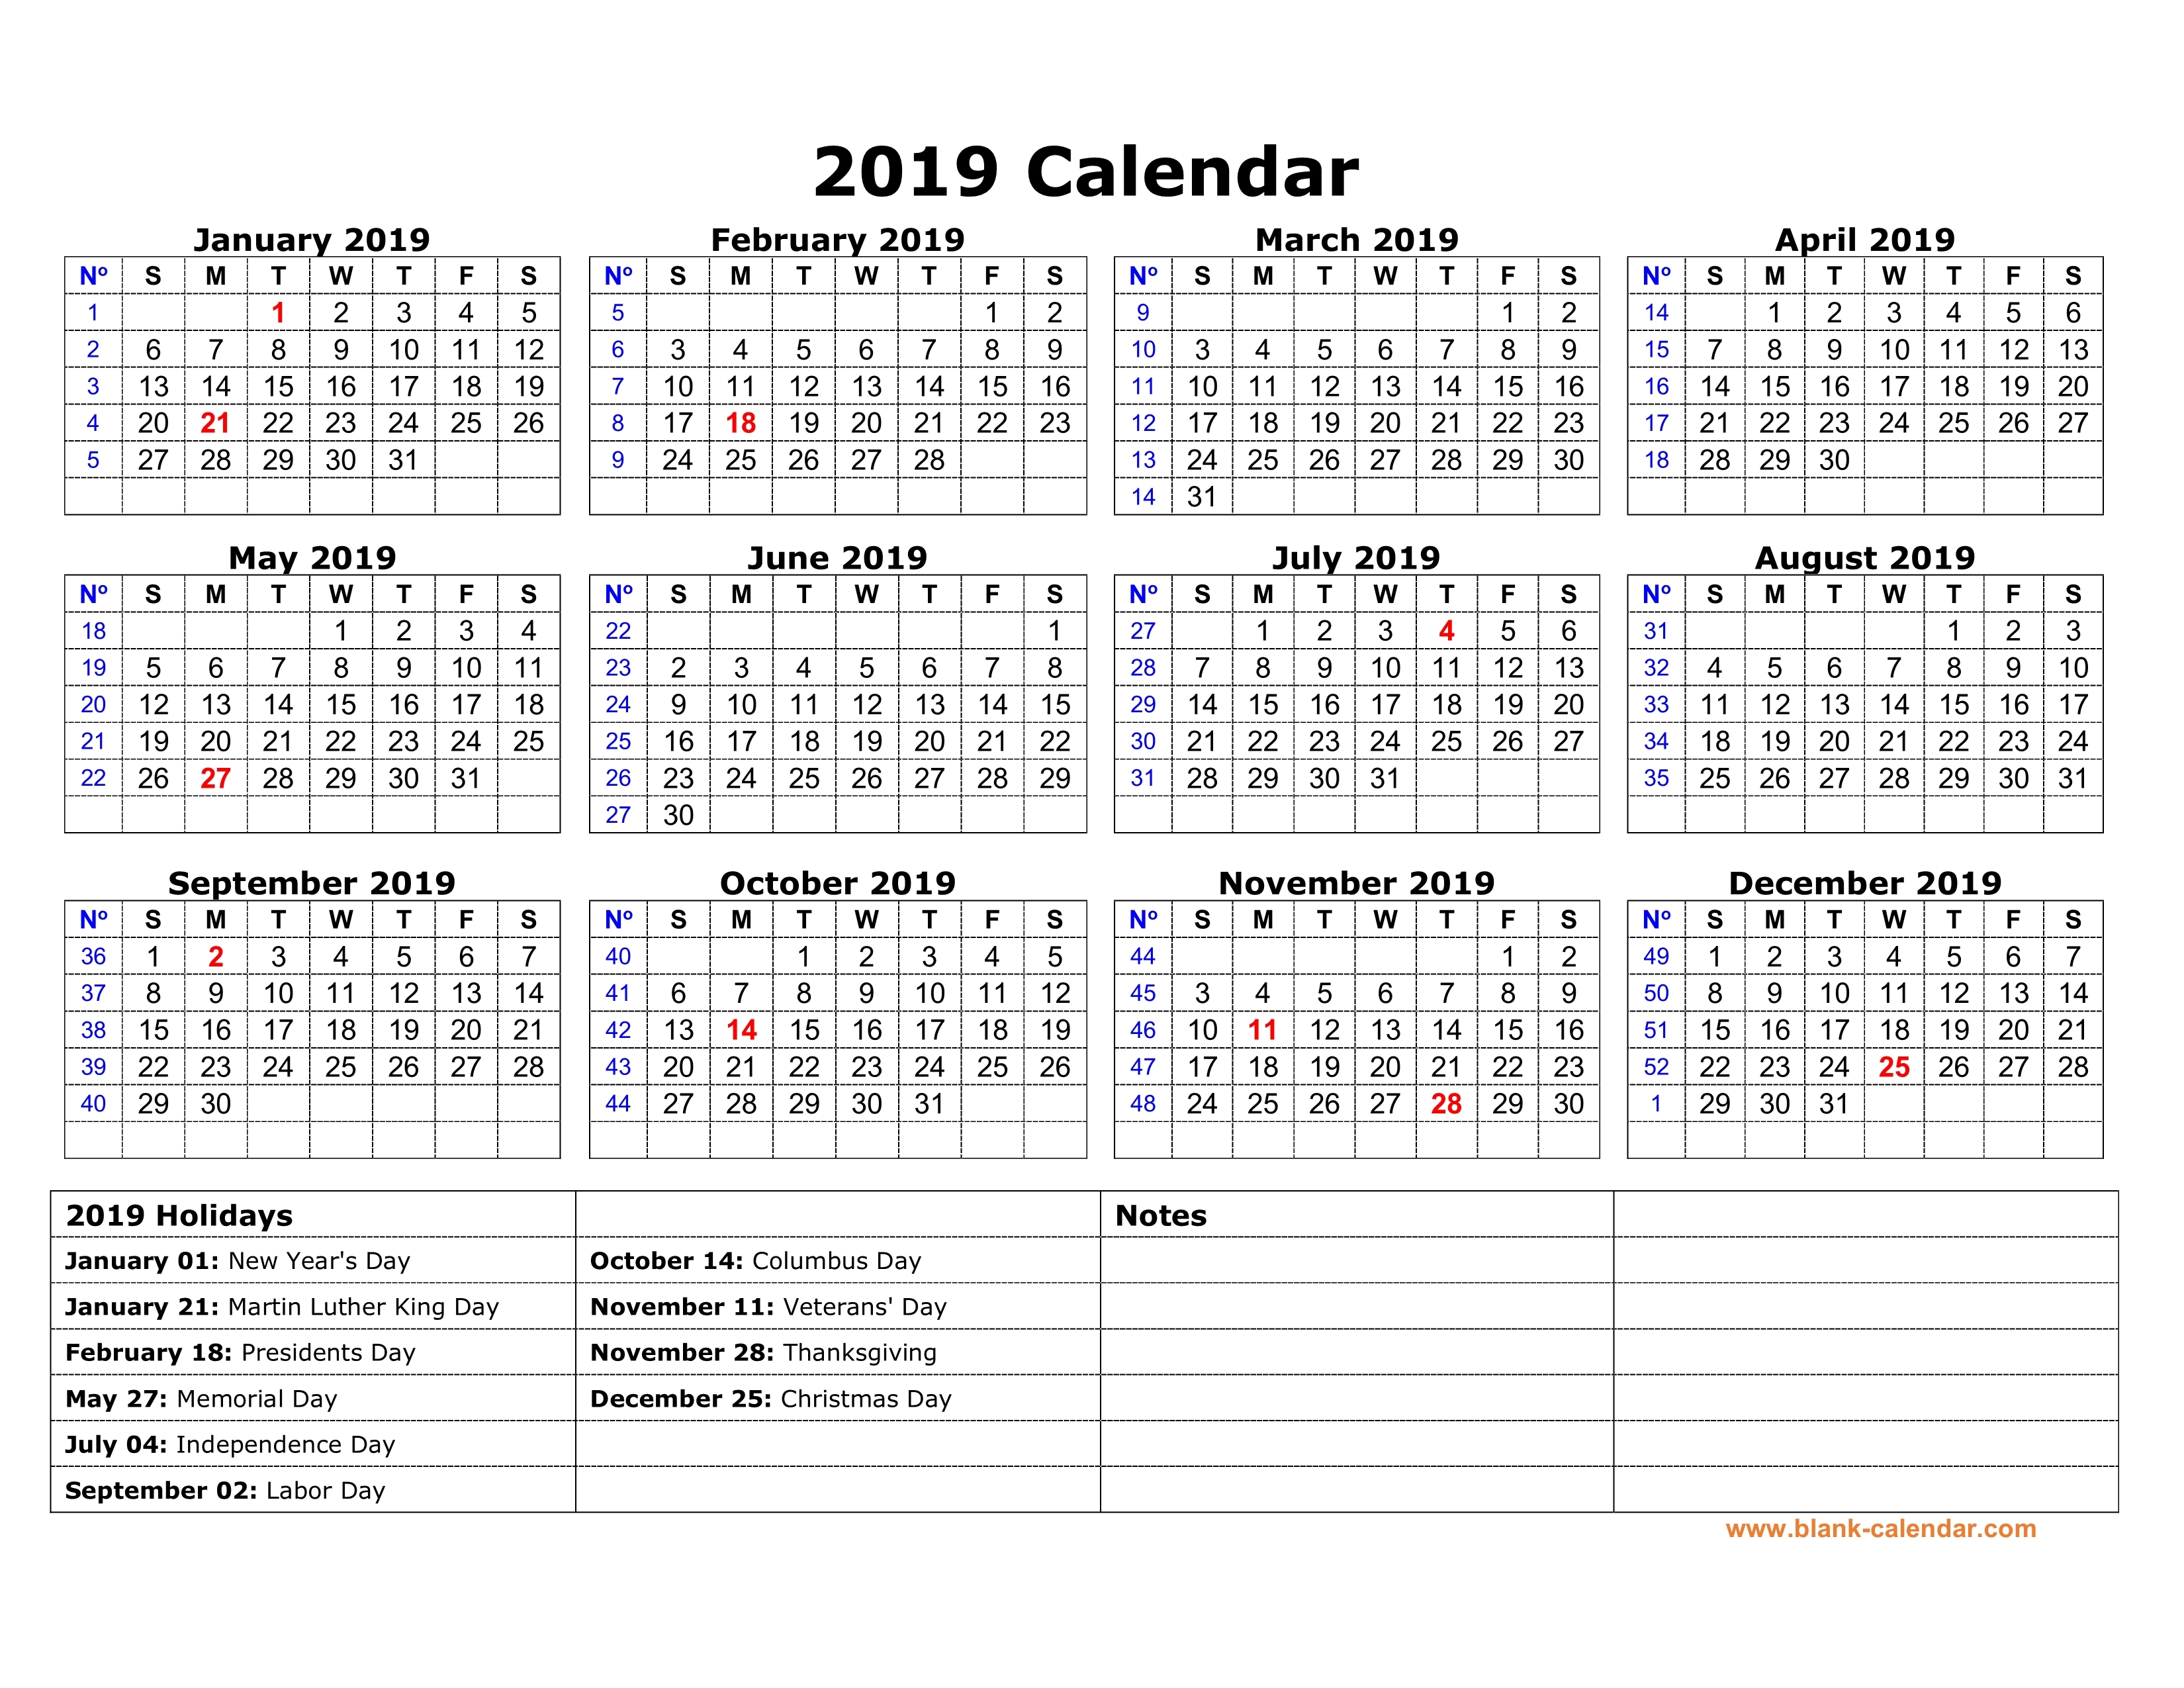 Download The Printable 2019 Calendar Free With Holidays